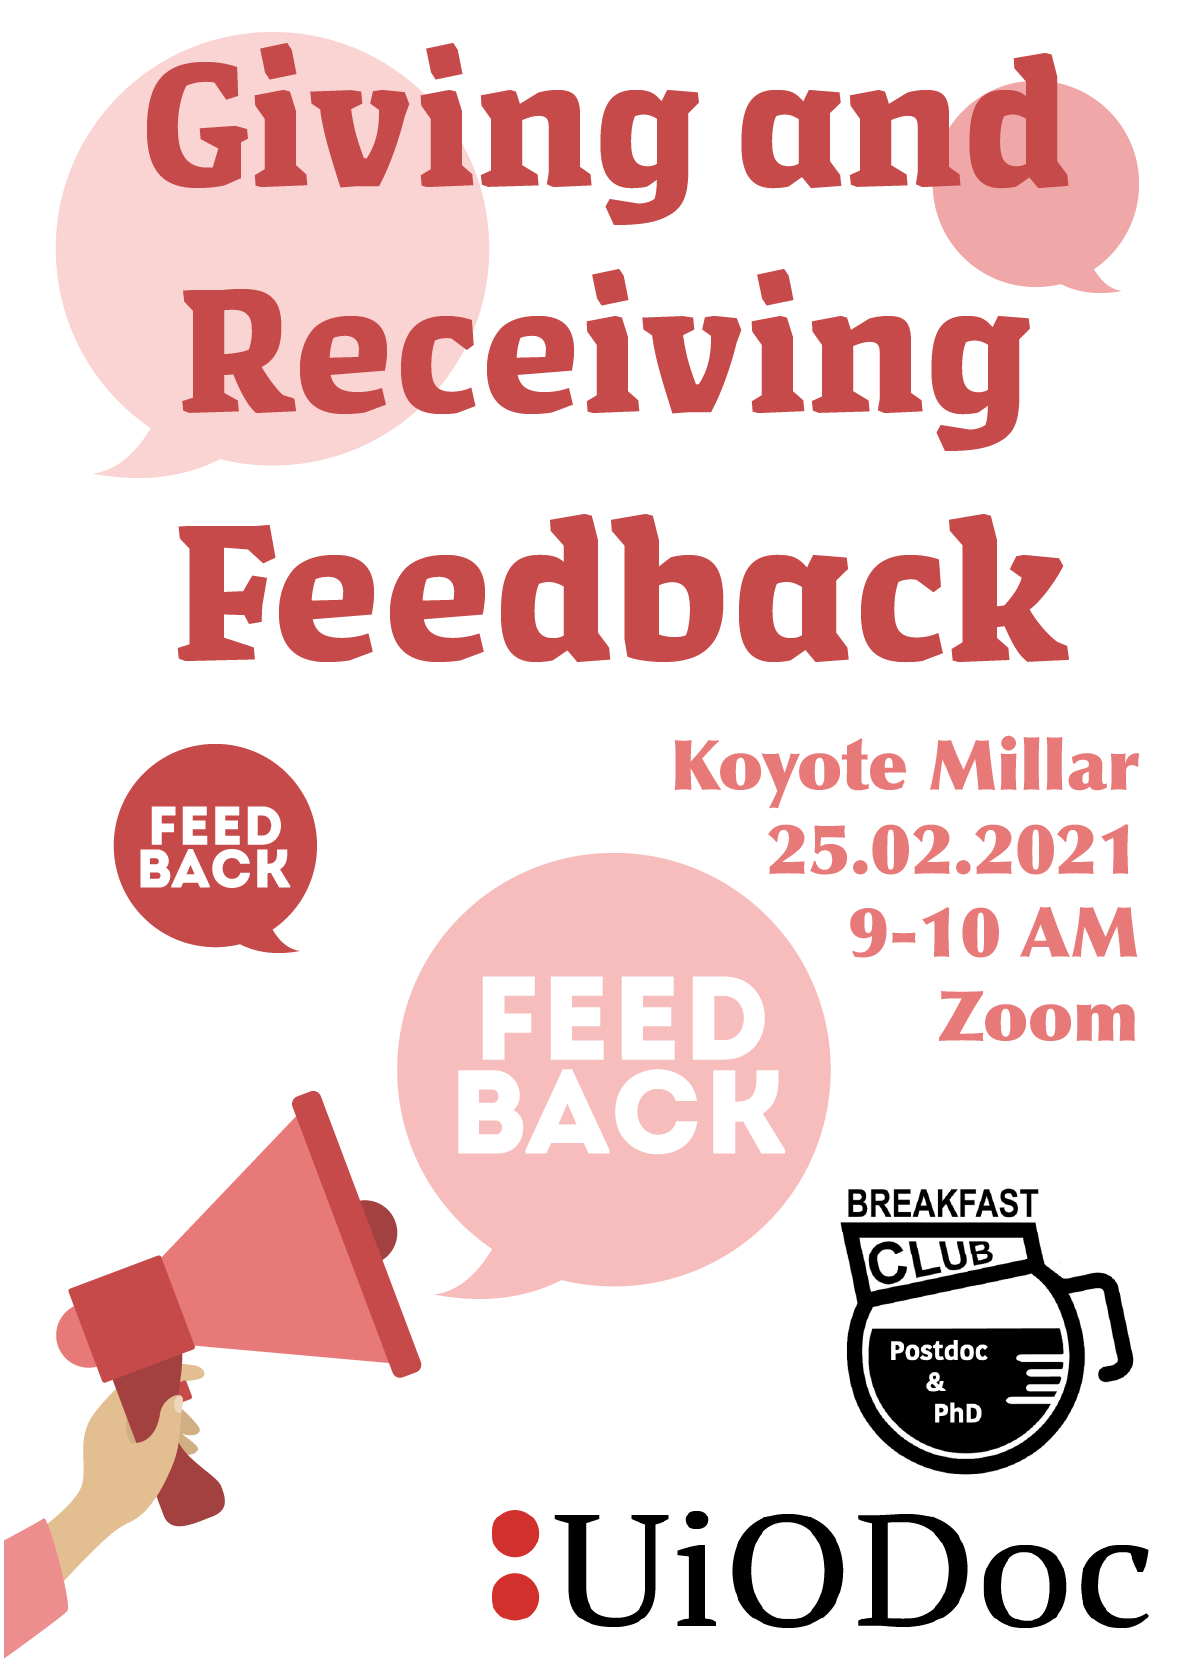 Poster that summerizes the PPBC event details on giving and receiving feedback.